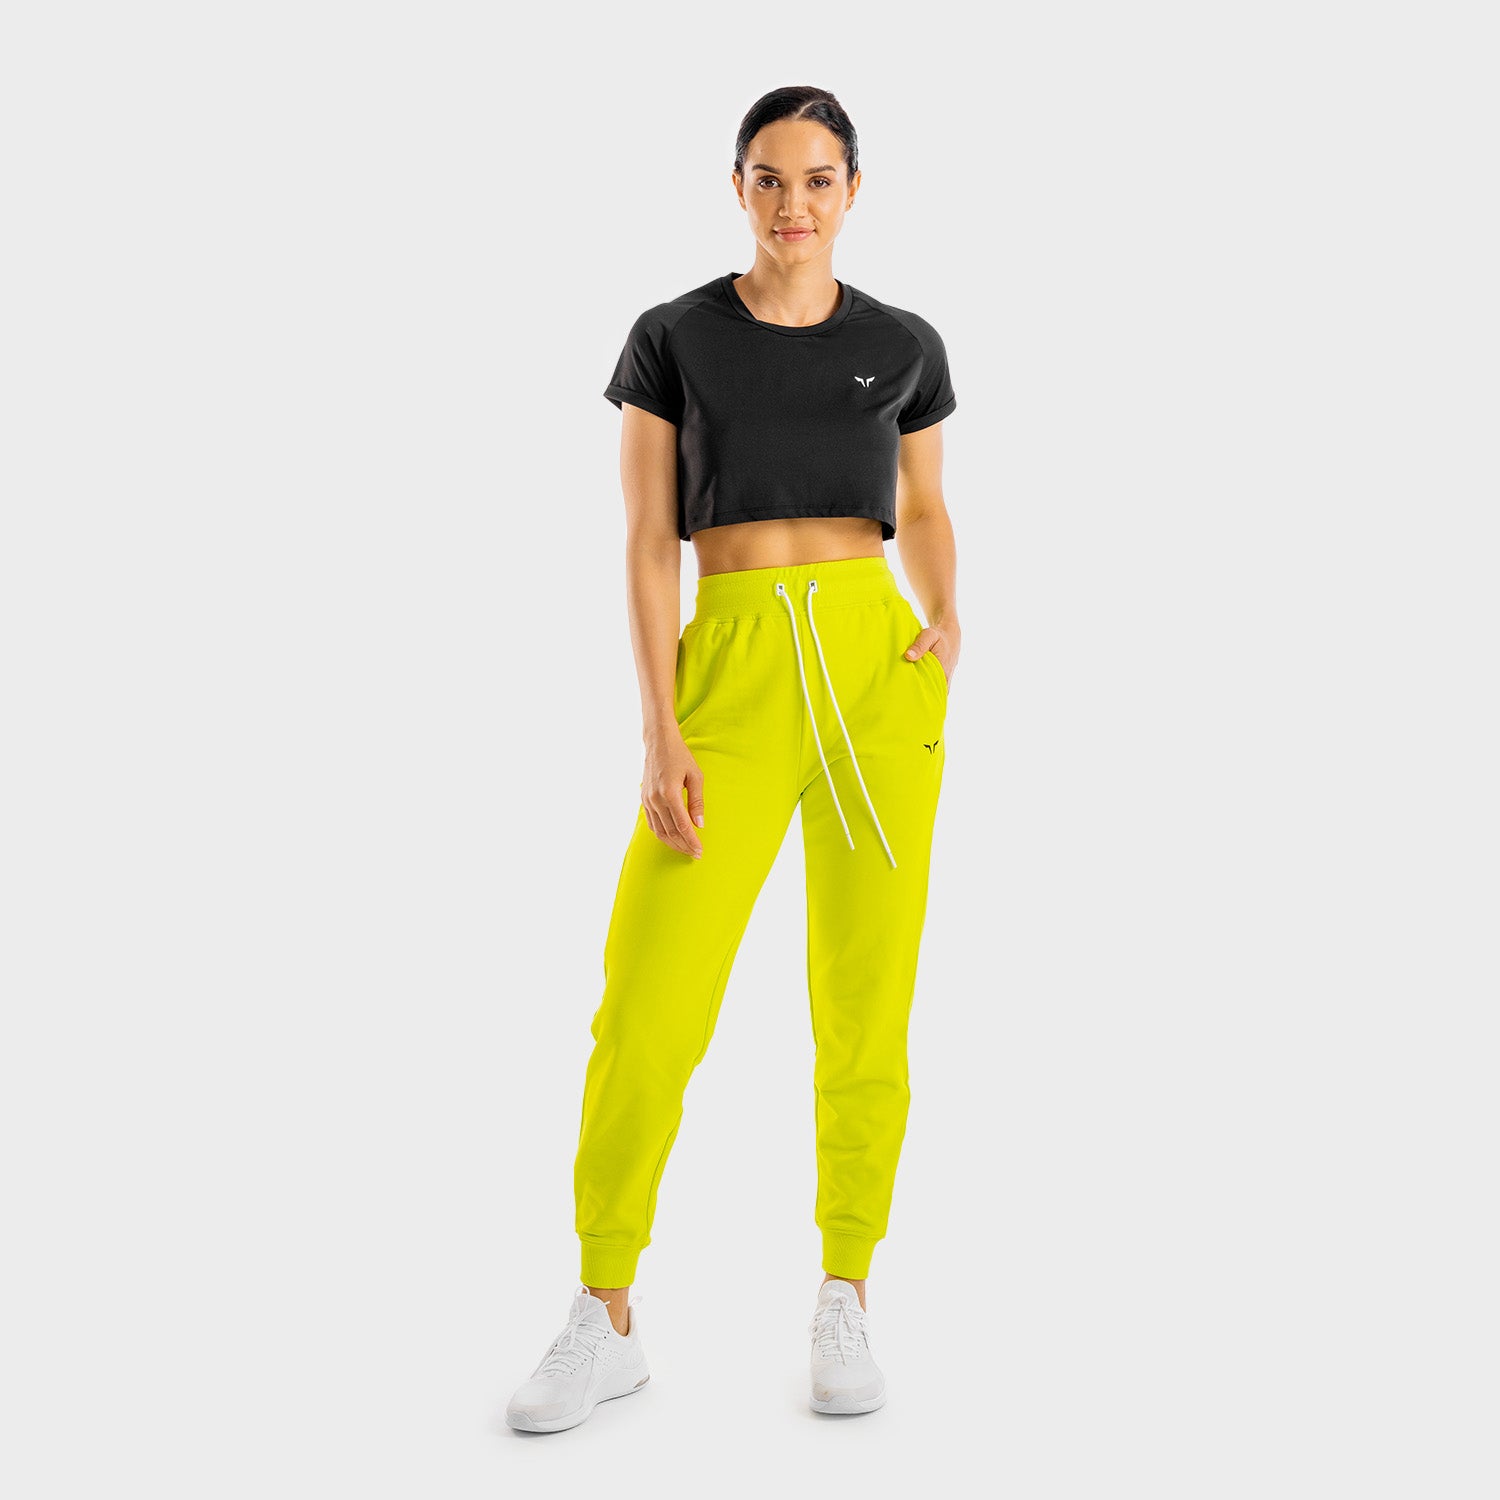 squatwolf-gym-pants-for-women-core-oversize-joggers-neon-workout-clothes